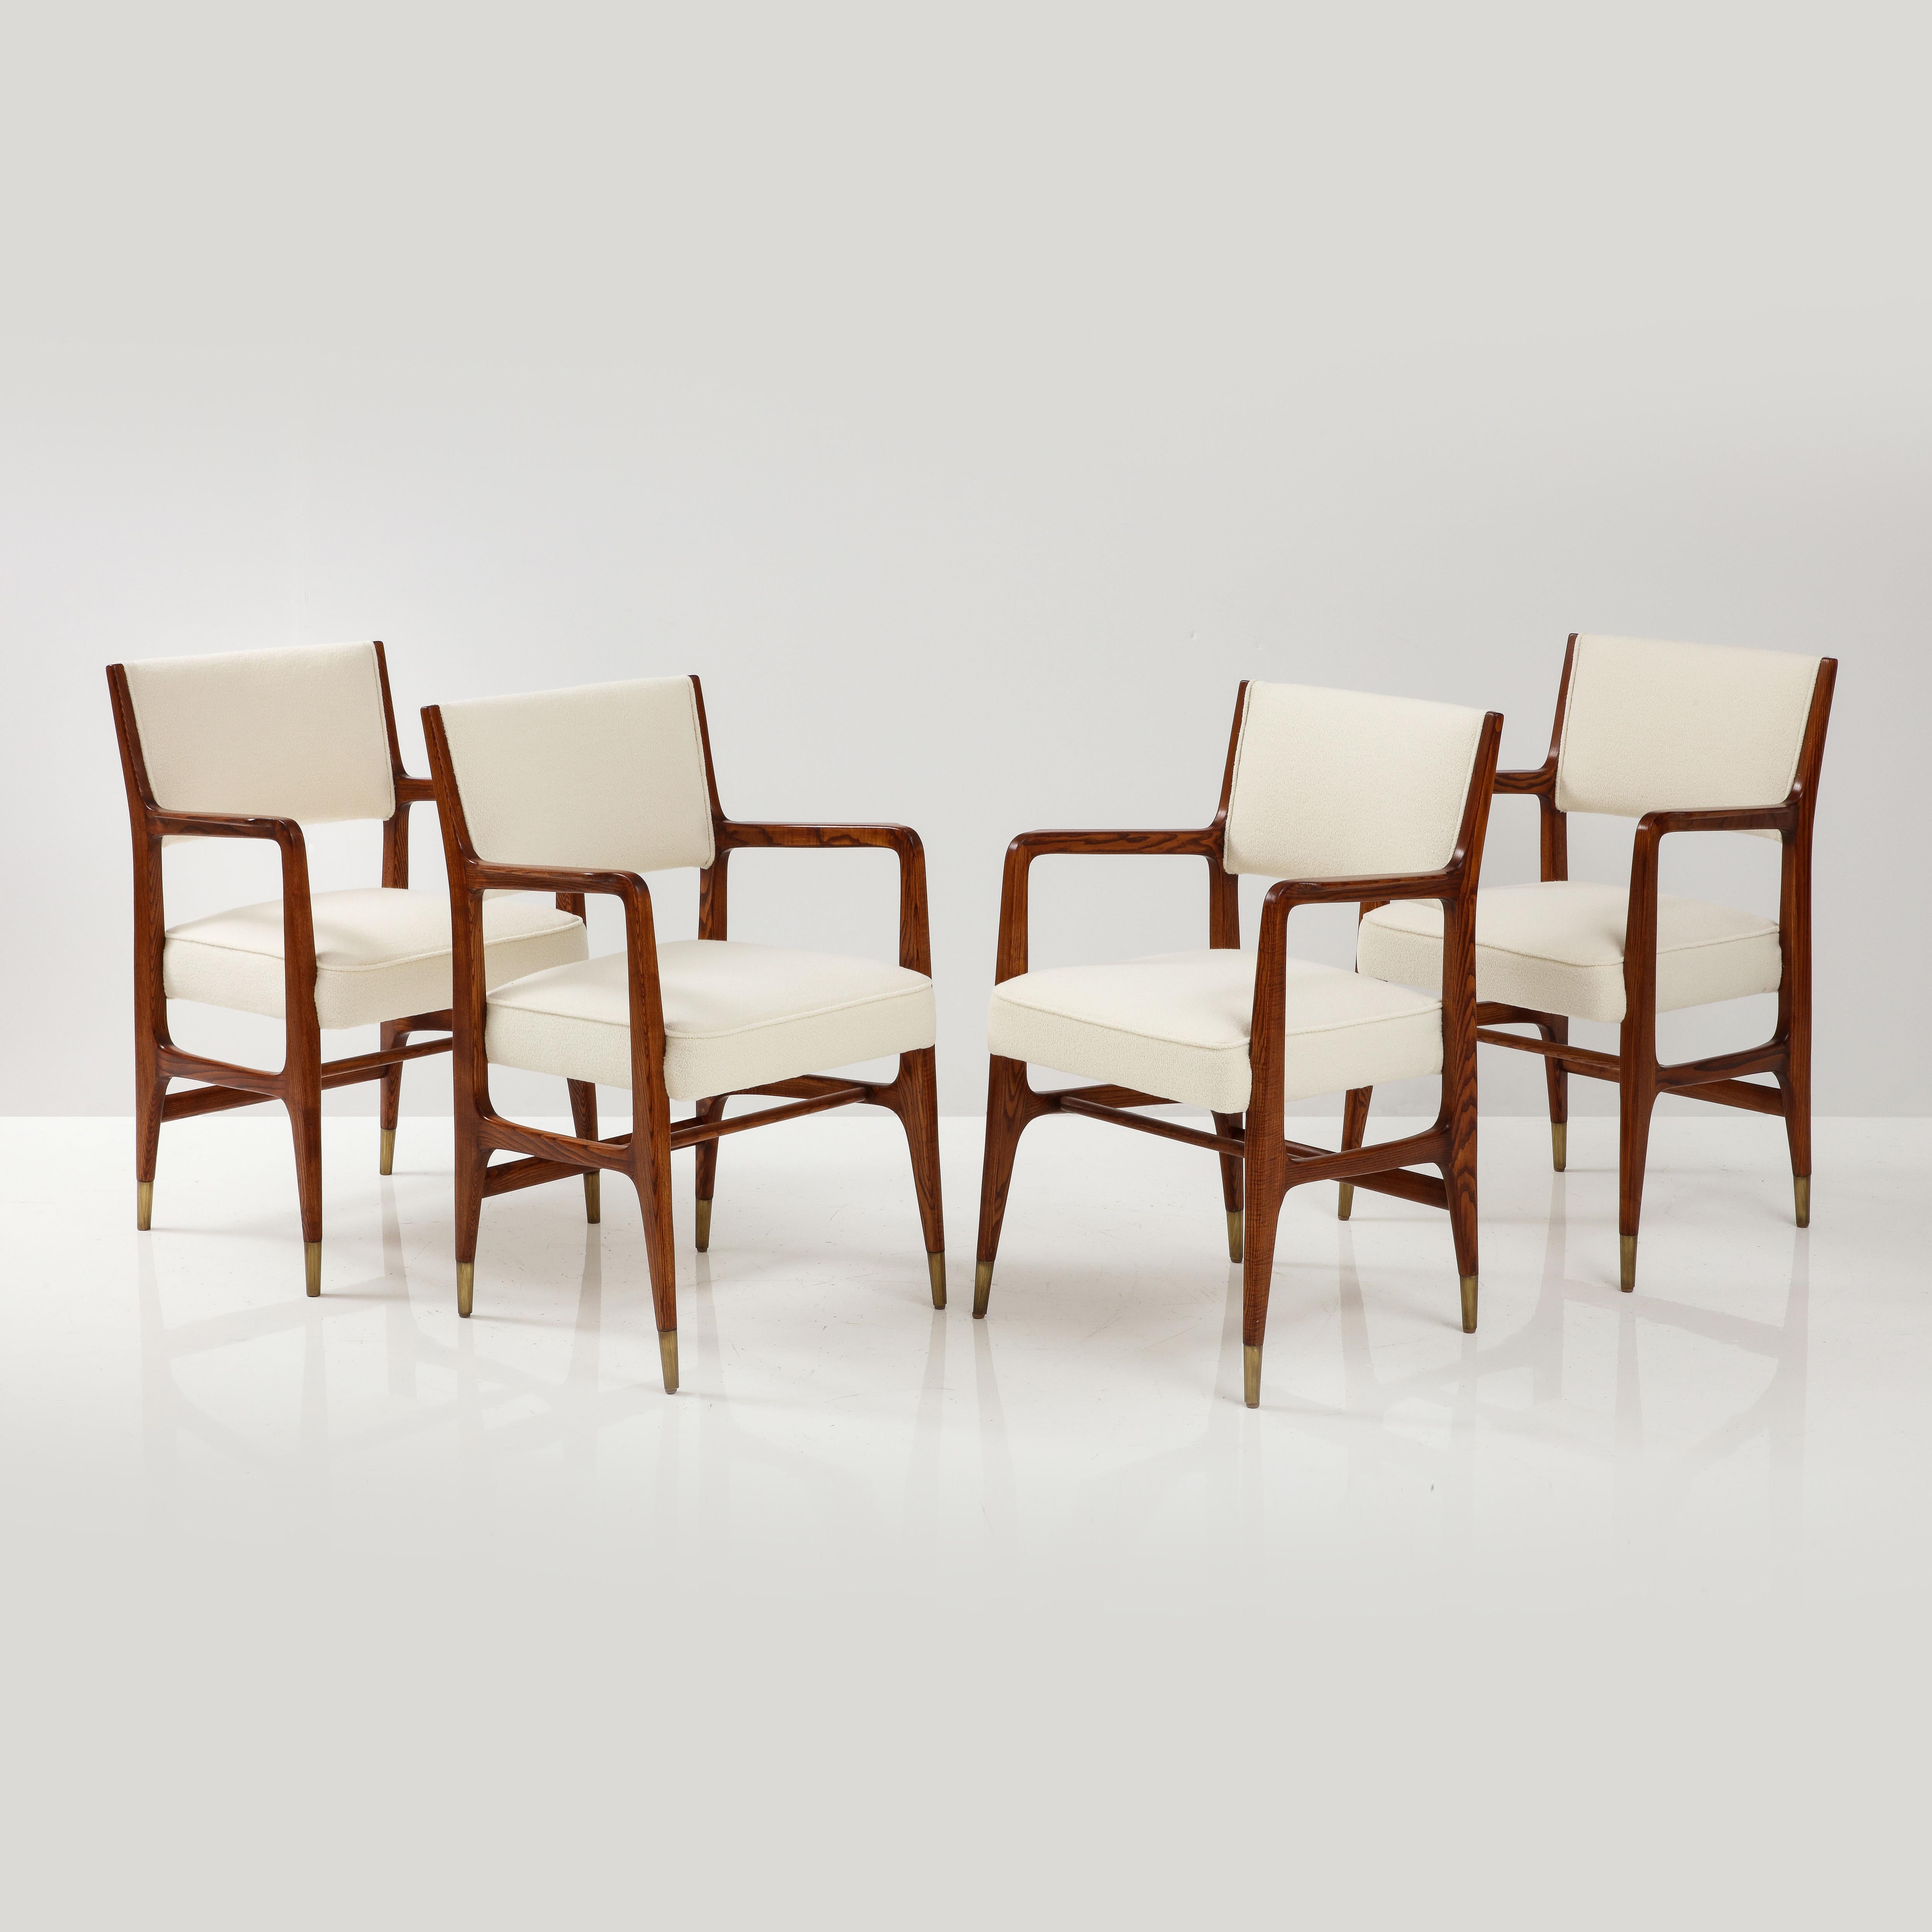 Brass Gio Ponti for Cassina Rare Set of 8 Dining Chairs Model 110 in Ivory Bouclé